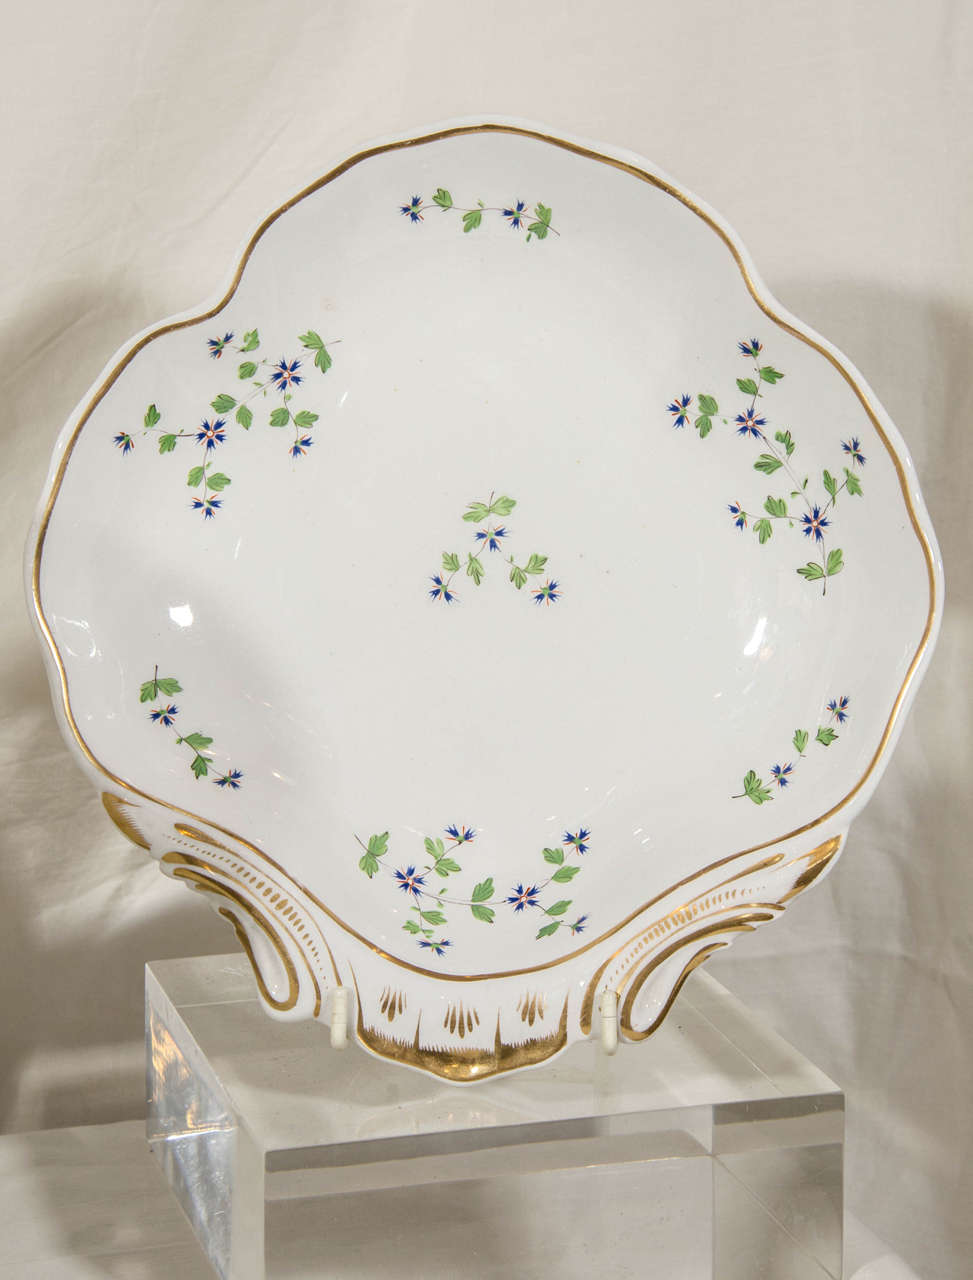 English Set of Derby Dishes in the Sprig Pattern